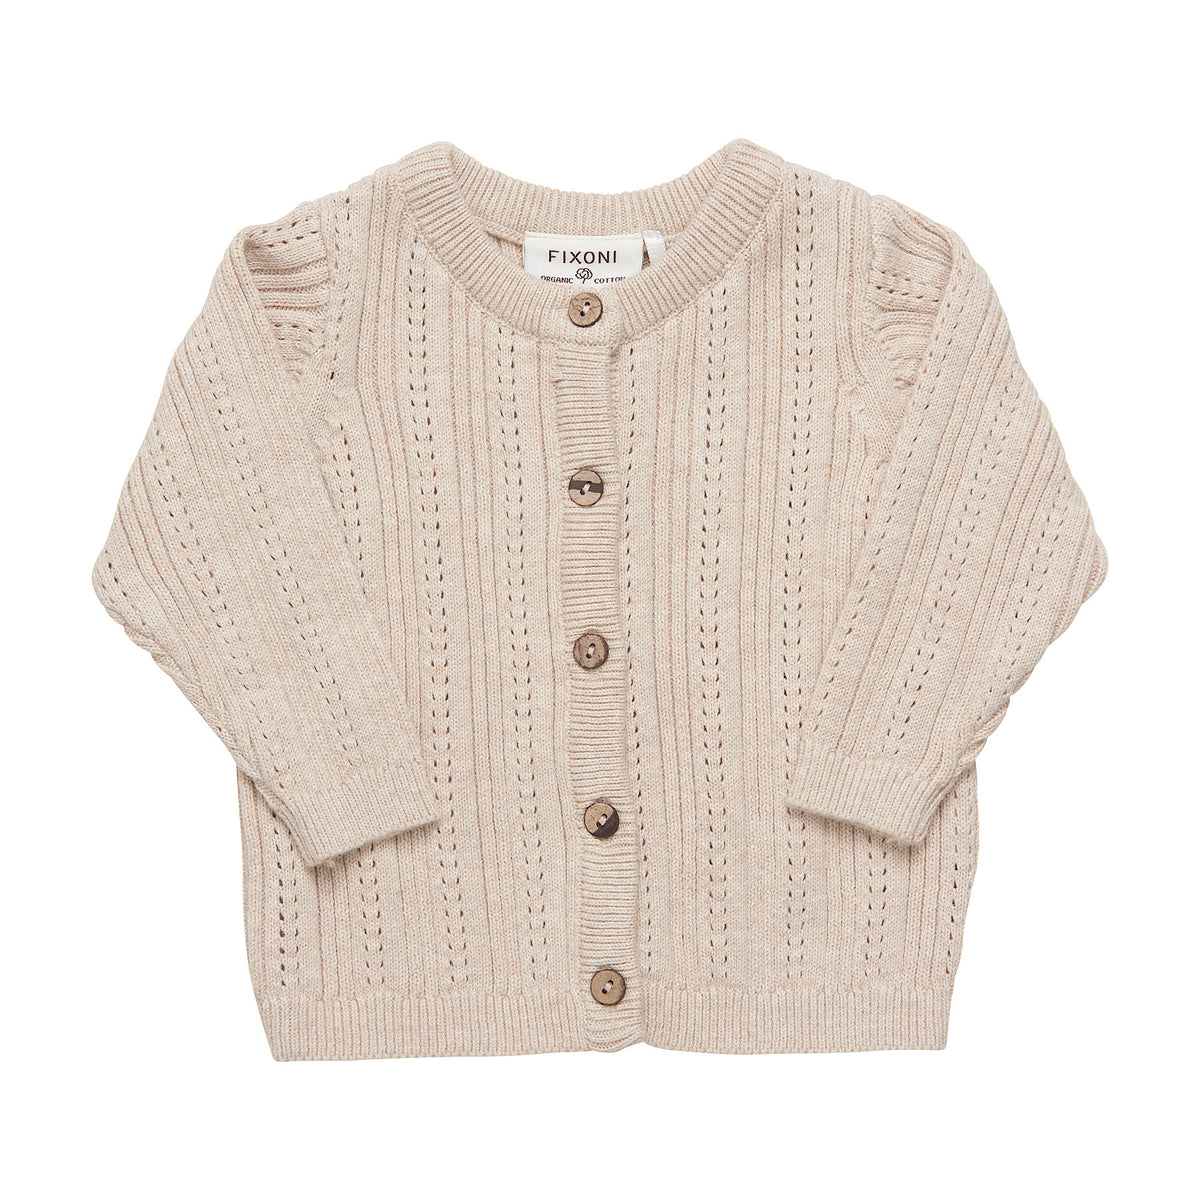 Knit Cardigan with Wooden Button Details, Tan